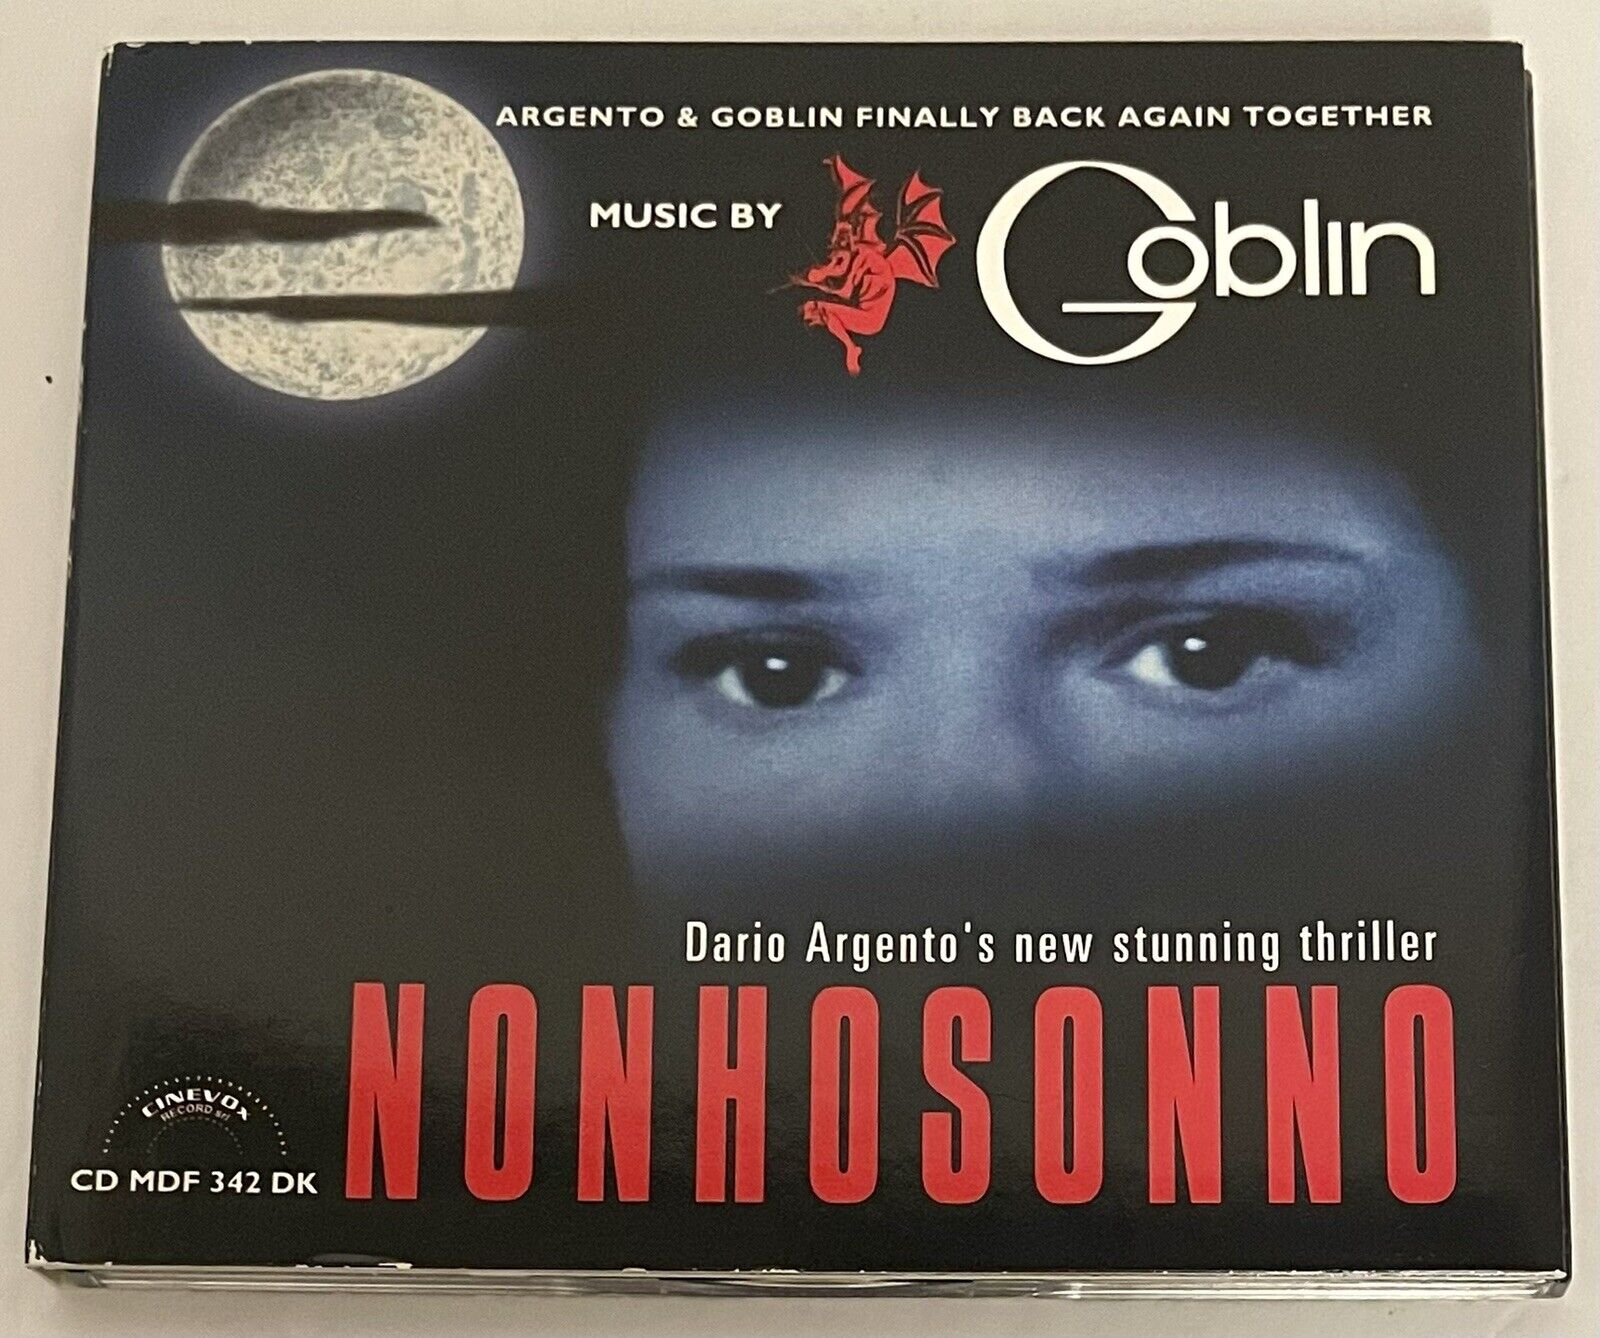 Nonhosonno, by Goblin, Soundtrack, Limited Edition, Stereo, CD, Italy, 2000